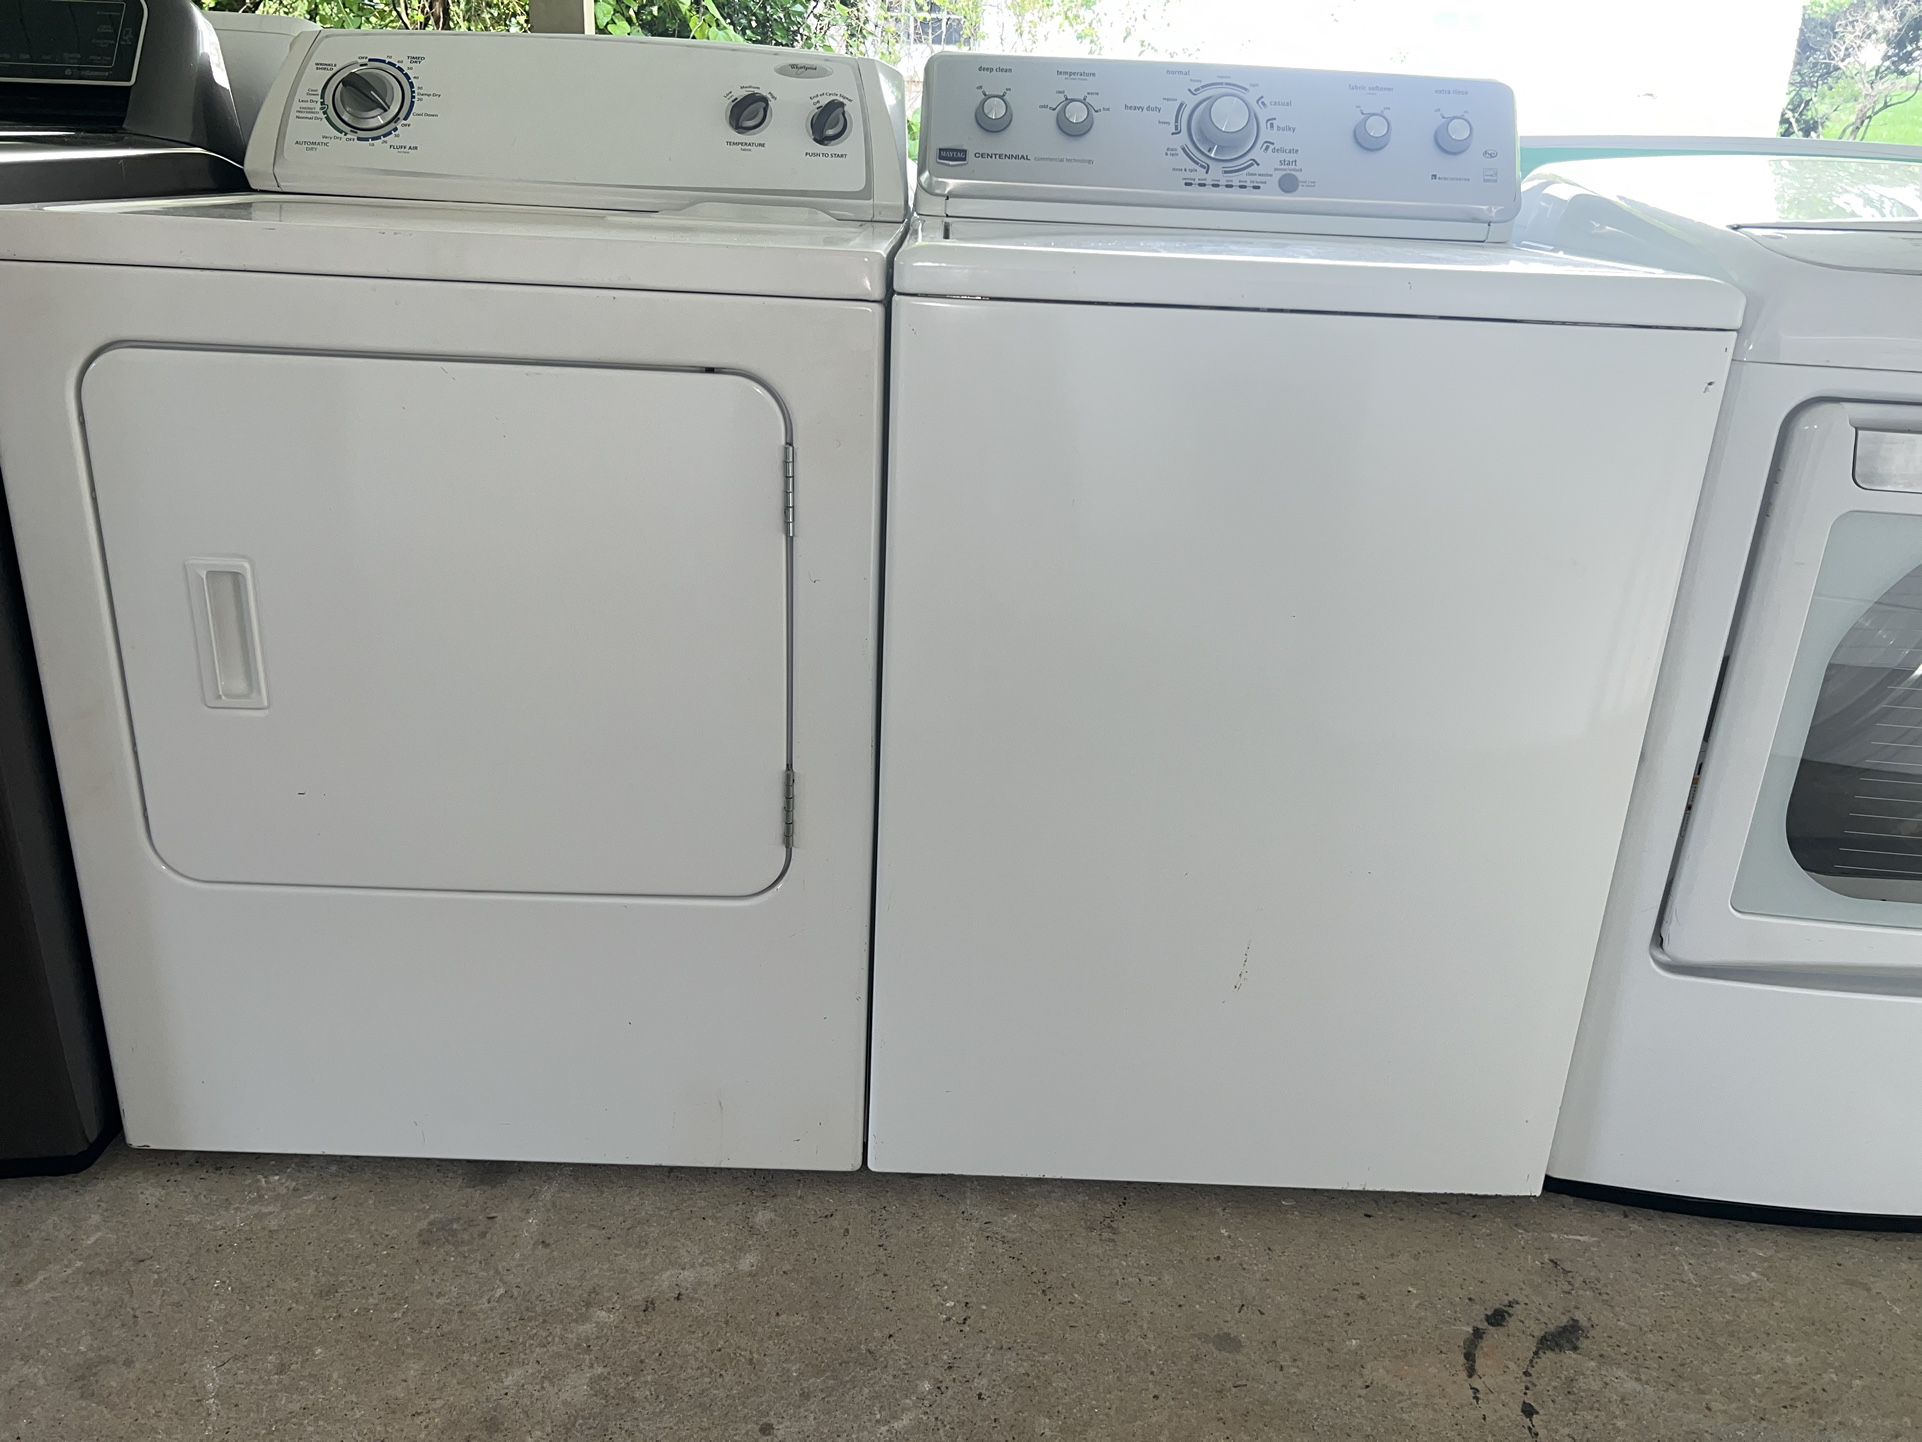 Set Maytag Washer And Whirlpool Dryer Electric.